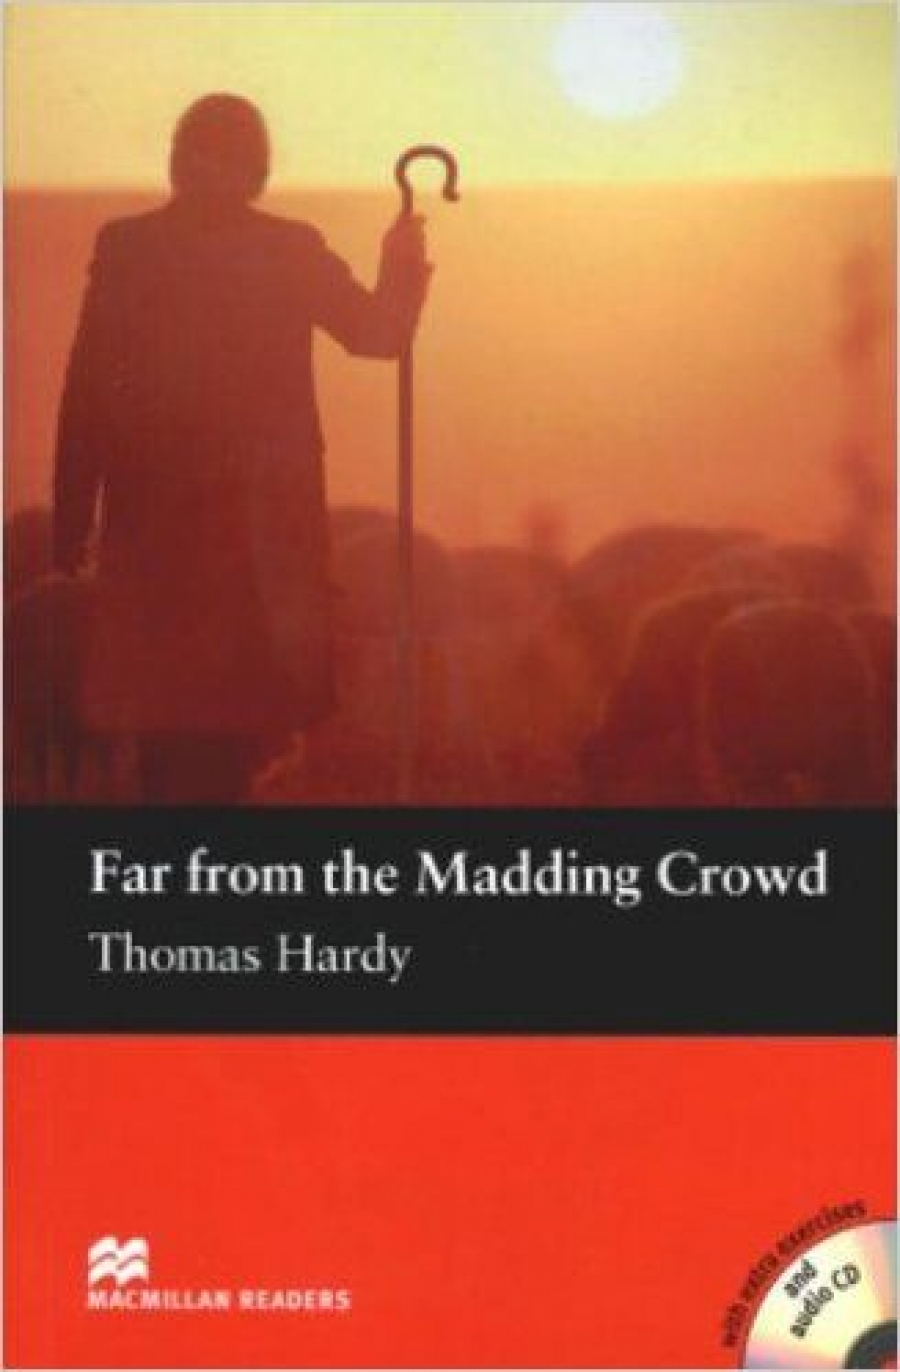 Thomas Hardy, retold by John Escott Far from the Madding Crowd (with Audio CD) 